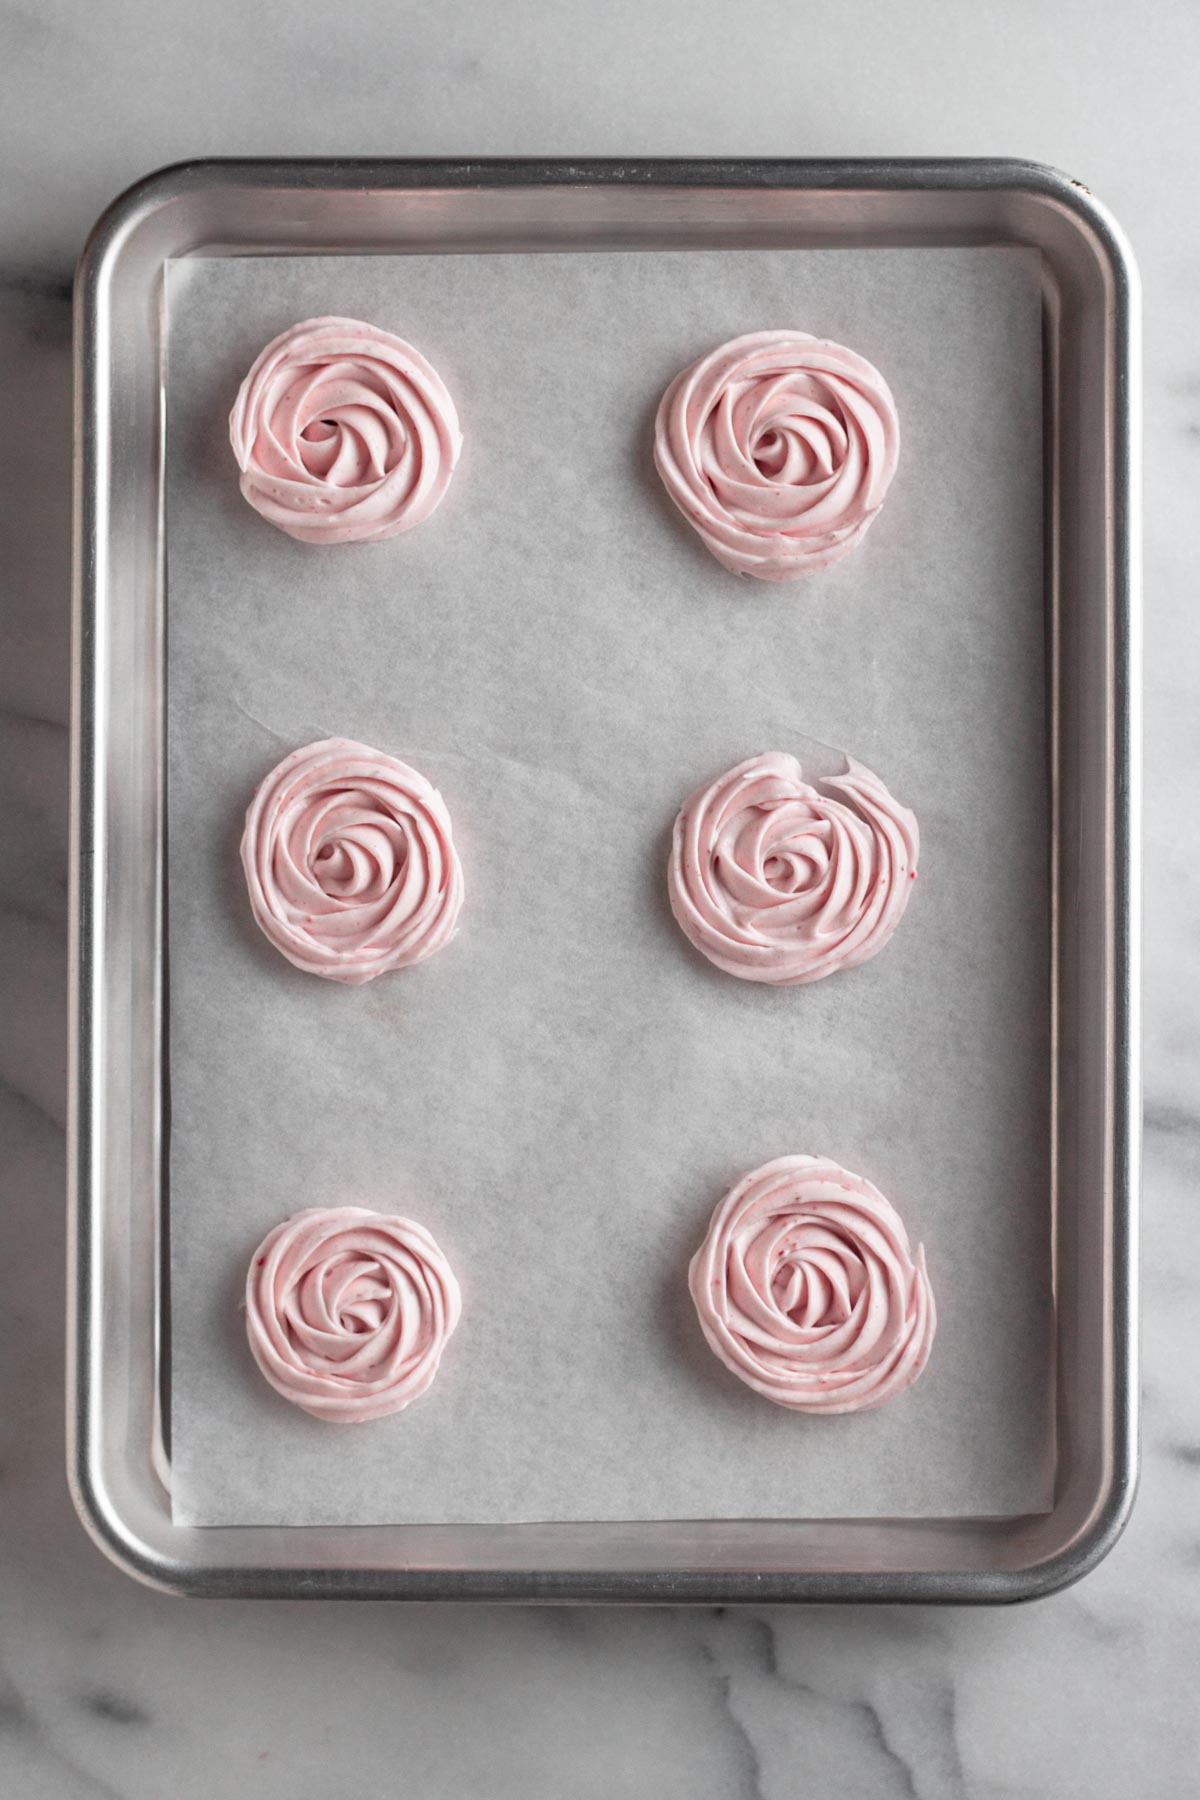 strawberry meringue piped in small rose spirals on a baking sheet